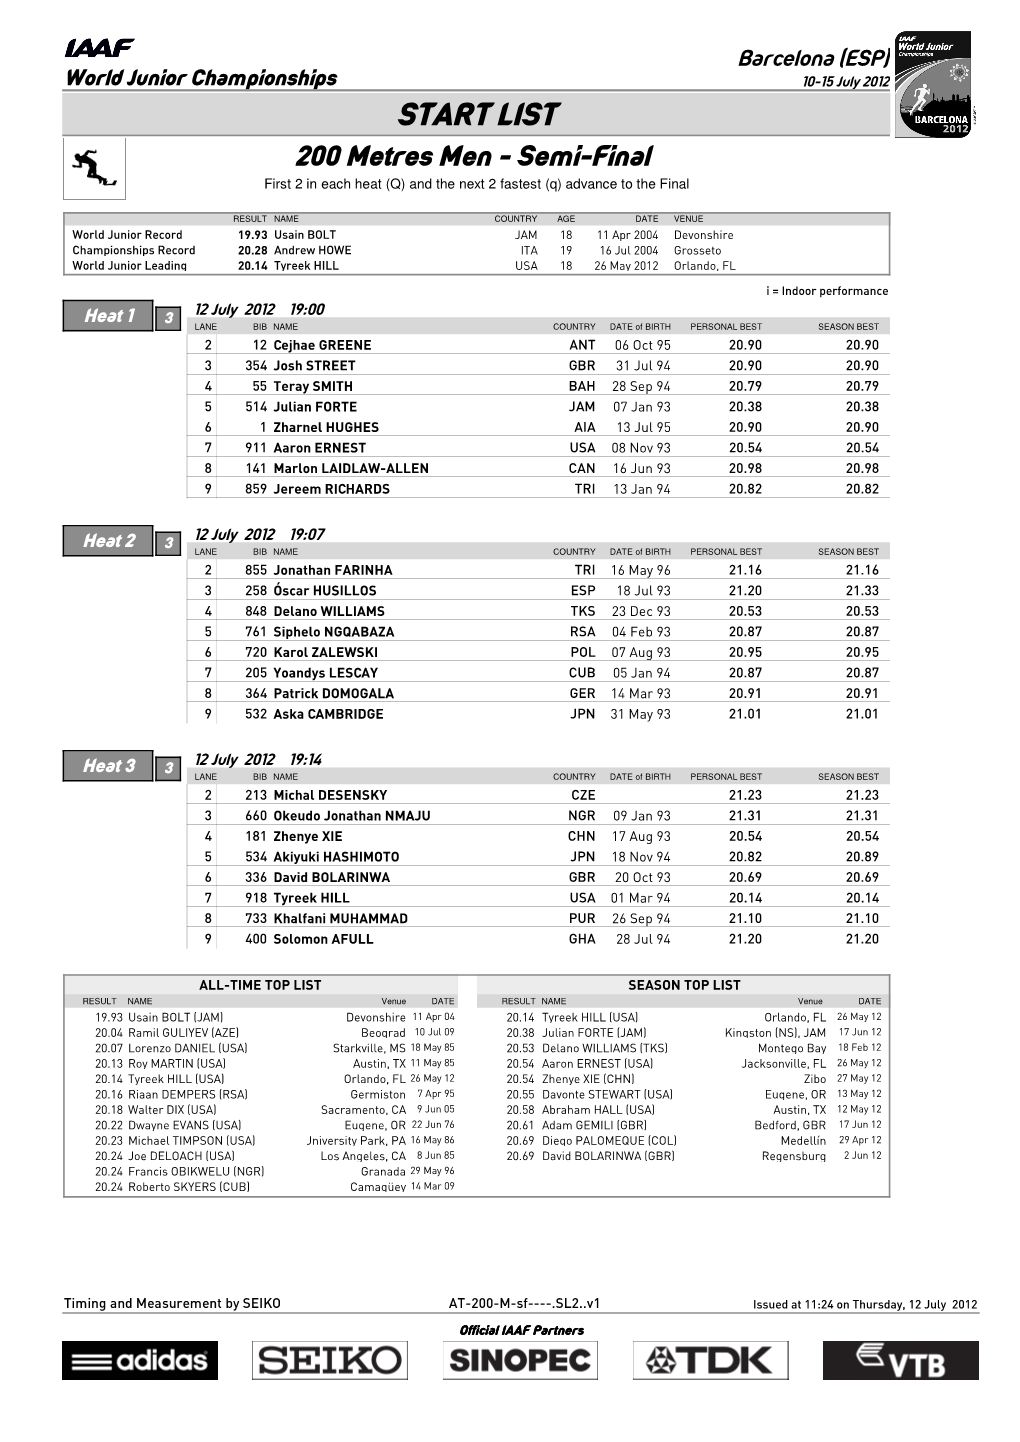 START LIST 200 Metres Men - Semi-Final First 2 in Each Heat (Q) and the Next 2 Fastest (Q) Advance to the Final